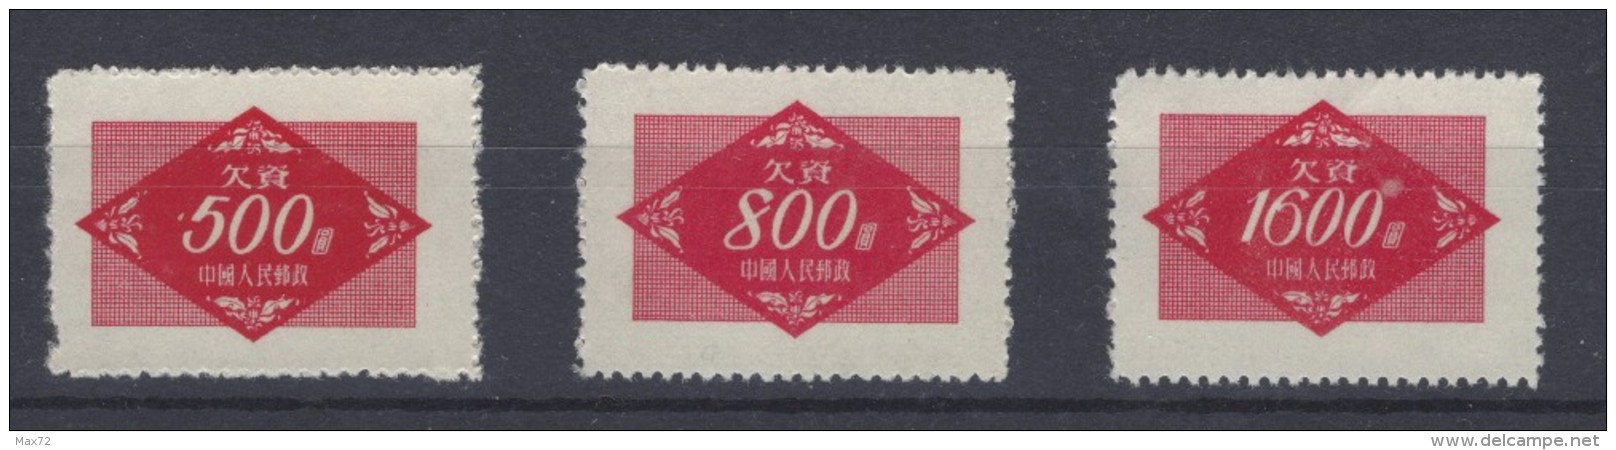 1954 CHINA MILITAR STAMPS MICHEL NR 12/14 MNH WG LIKE USUAL - Franquicia Militar